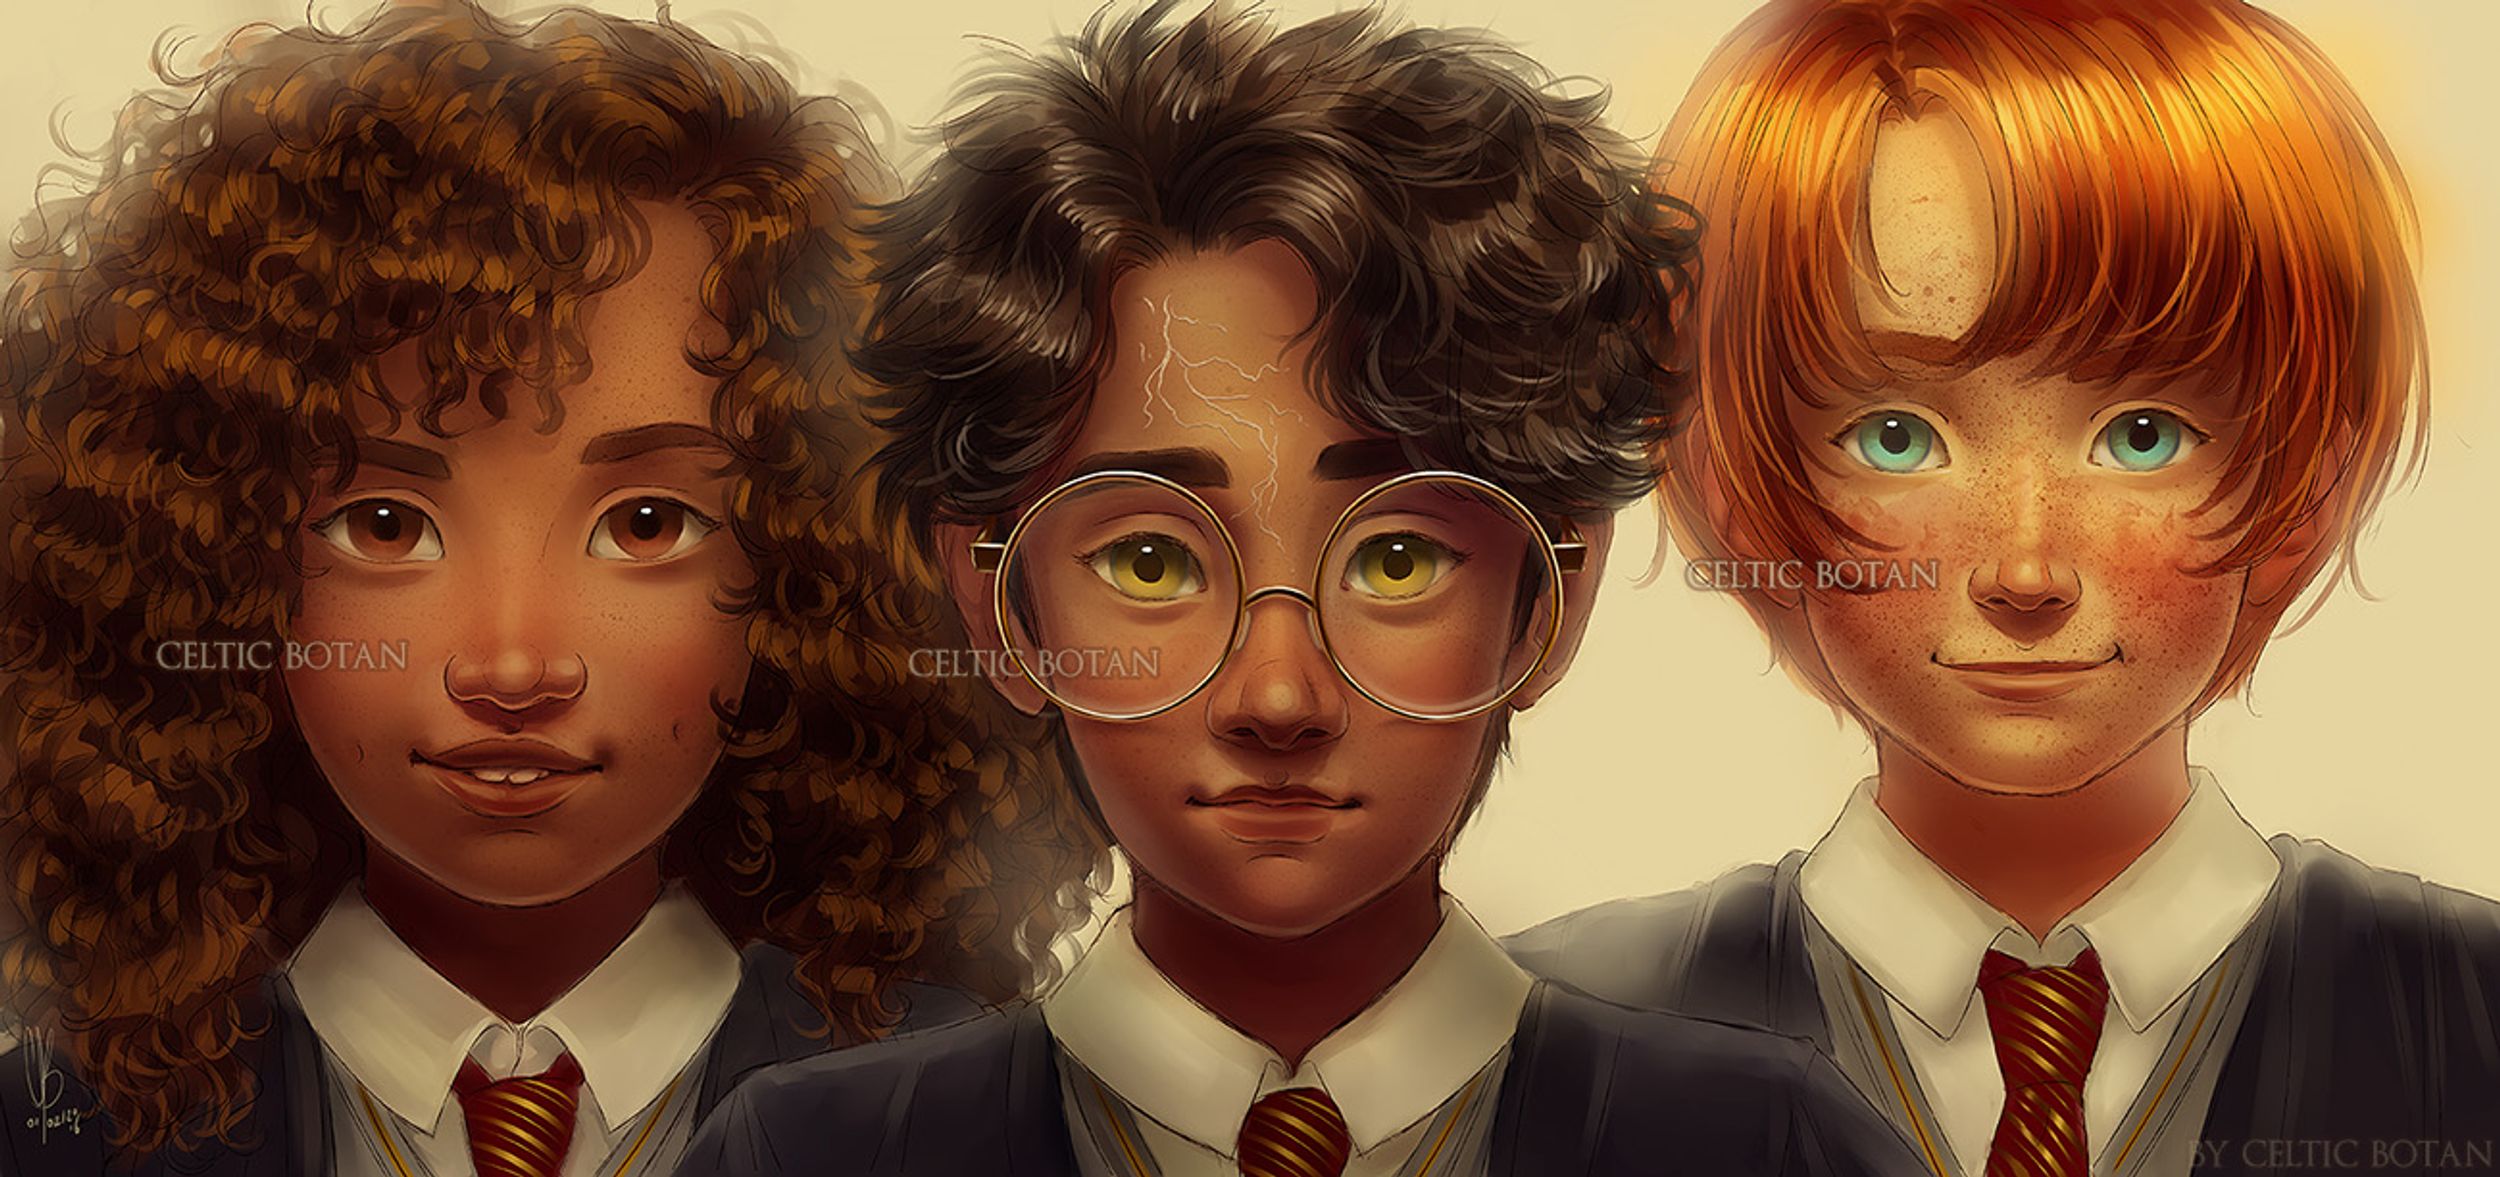 Why An Ethnically Diverse "Harry Potter" Is An Amazing Thing